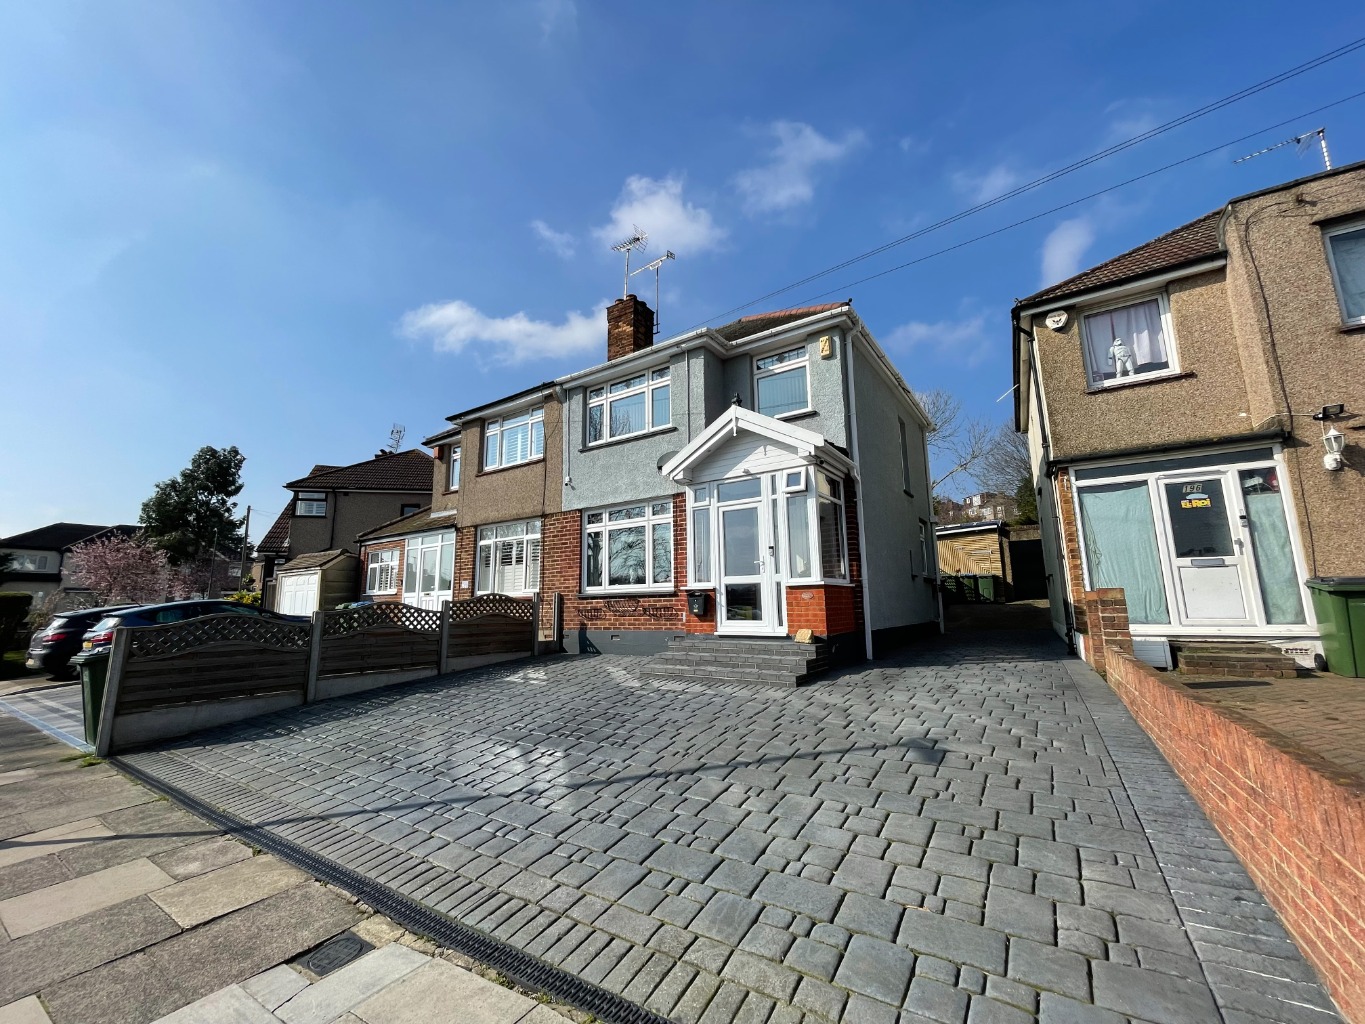 3 bed semi-detached house for sale in Plumstead - Property Image 1